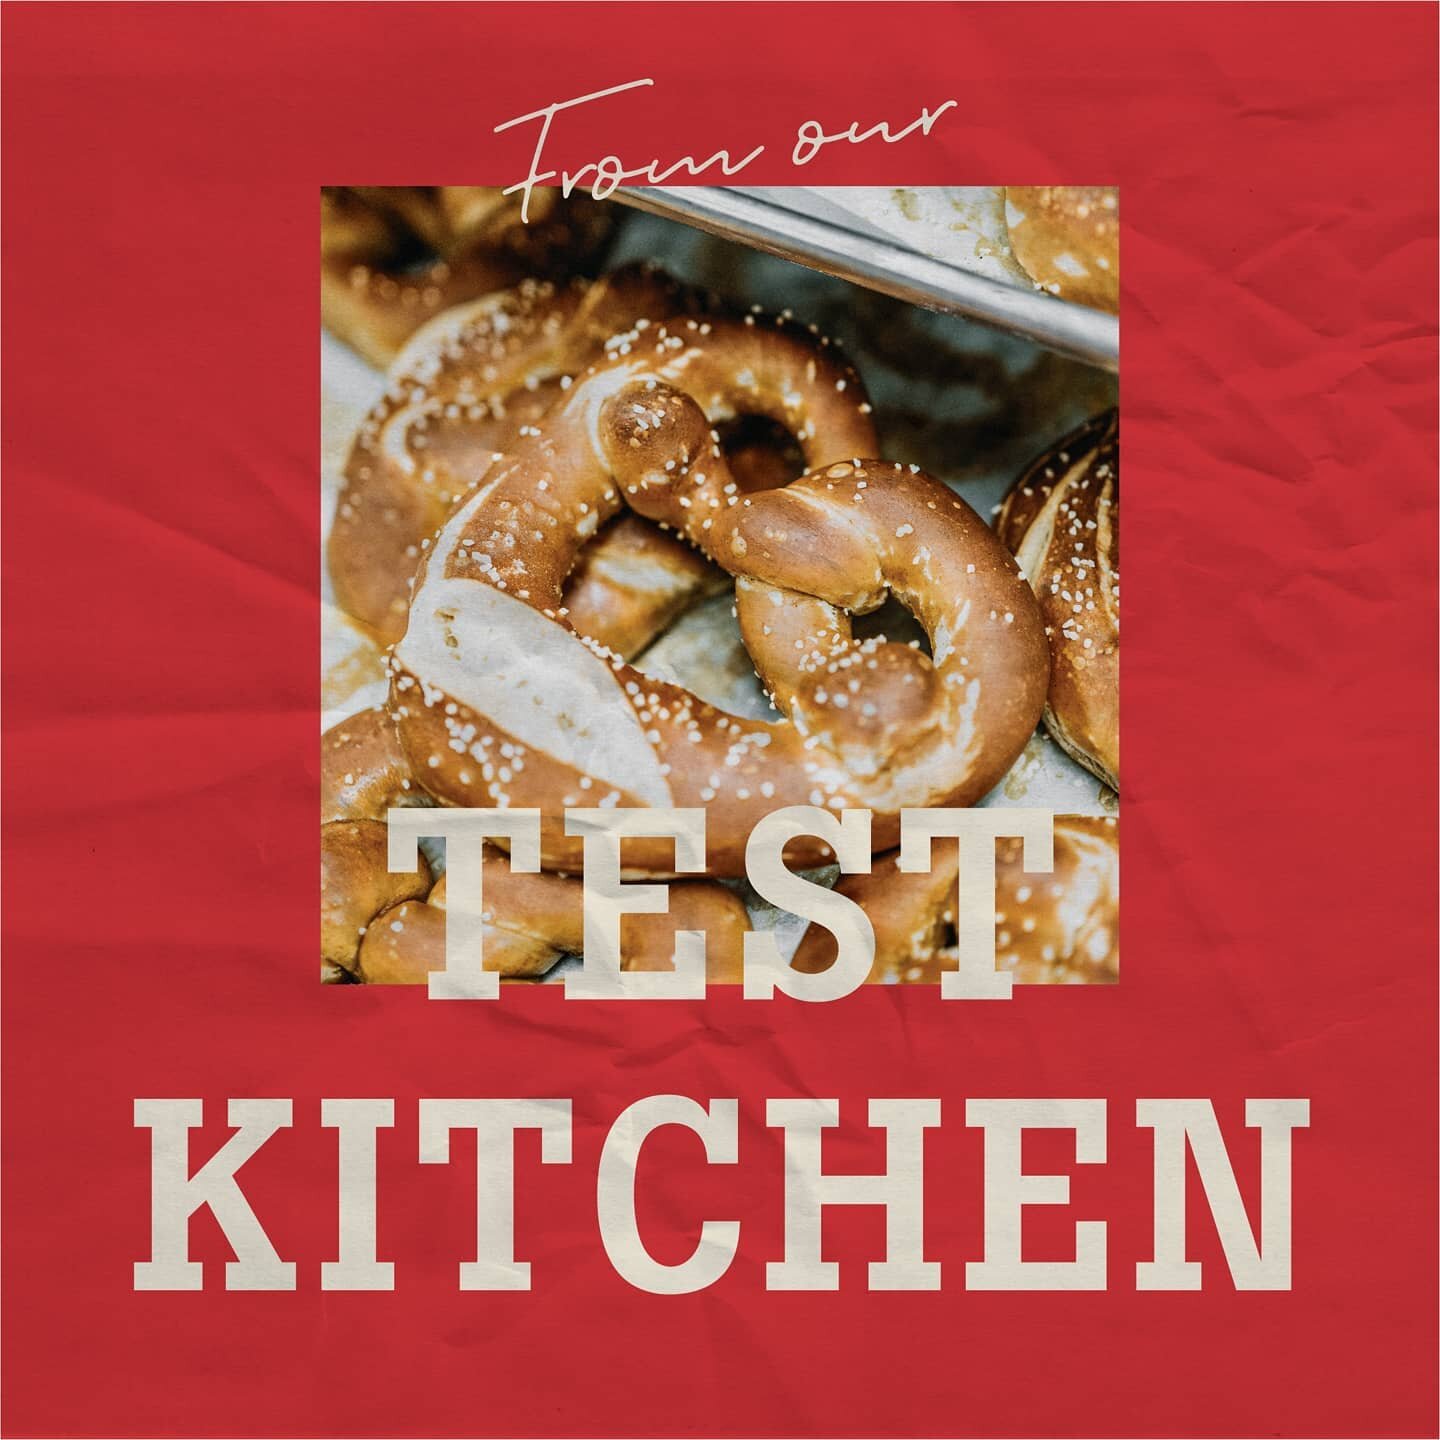 Here's a tip from our test kitchen to go along with the German Soft Pretzel recipe we will be sharing tomorrow! ⁠
⁠
📌 Be sure to save this post so you can easily reference this tip along with our other test kitchen tips when you're baking and cookin